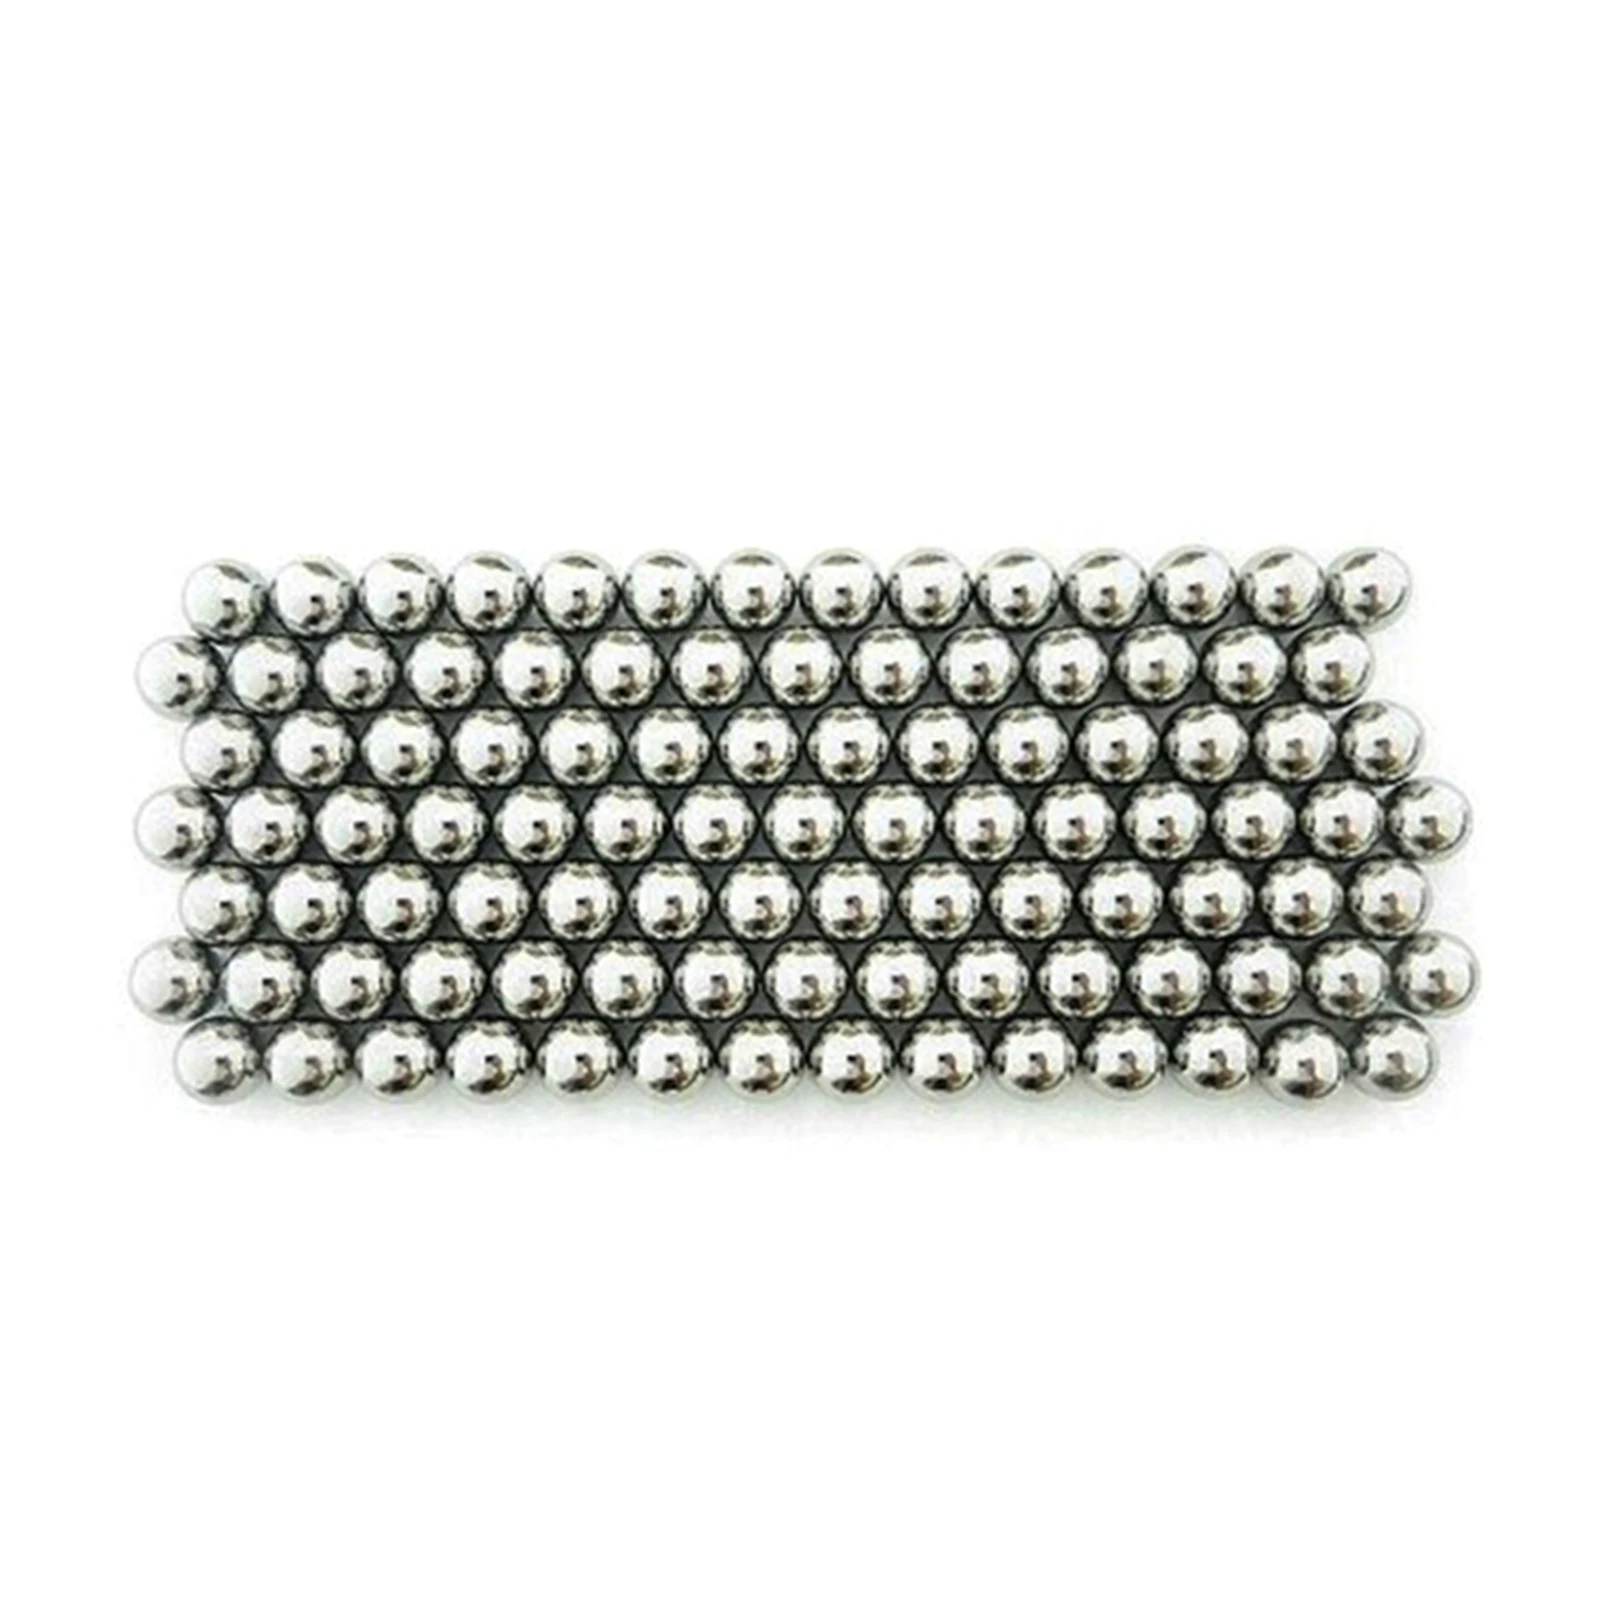 

50PCS/100PCS Stainless Steel Bearing Ball Higher Quality and Durability Ball for Outdoor Camping Ga